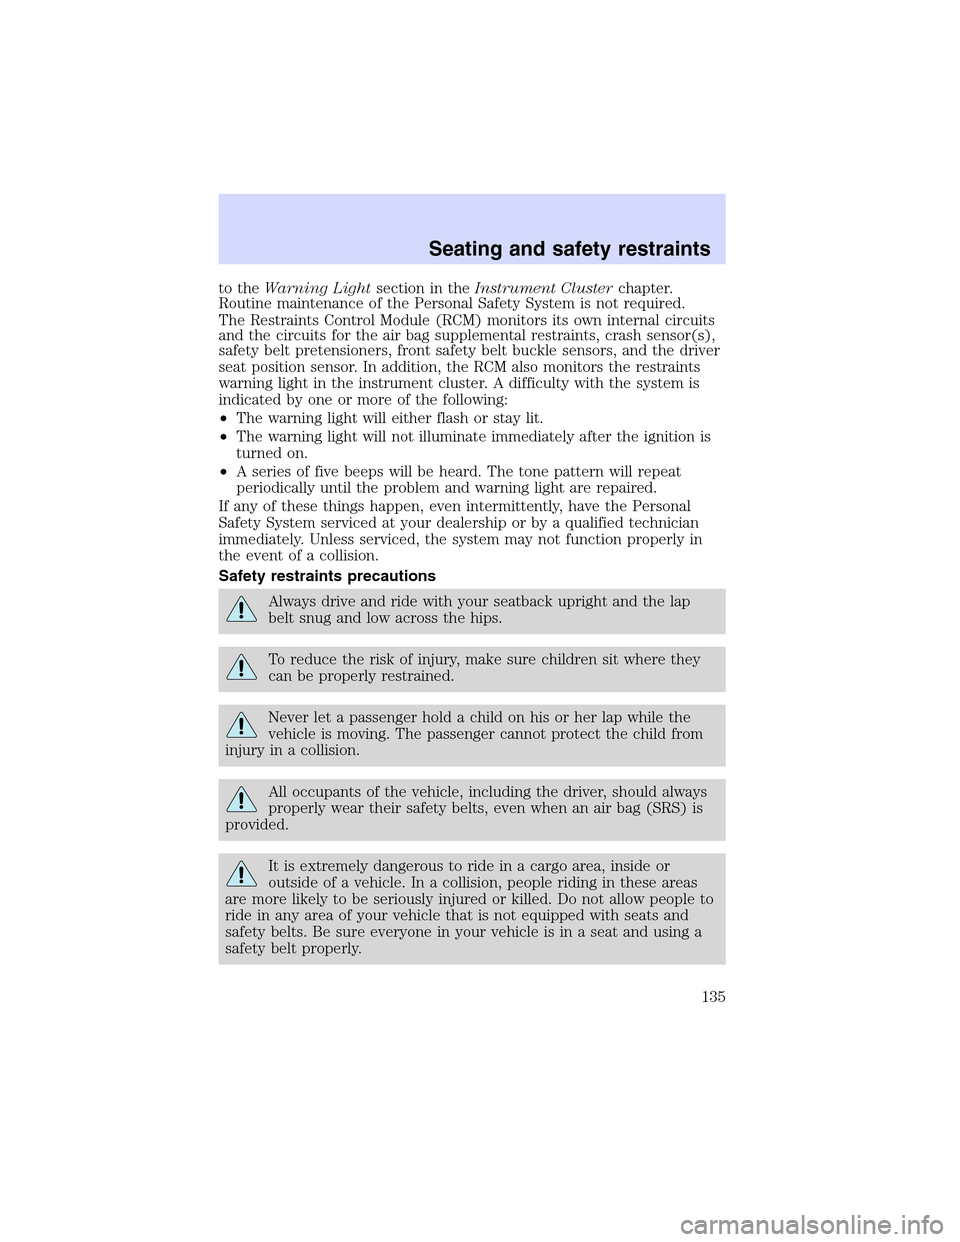 Mercury Mountaineer 2002  Owners Manuals to theWarning Lightsection in theInstrument Clusterchapter.
Routine maintenance of the Personal Safety System is not required.
The Restraints Control Module (RCM) monitors its own internal circuits
an